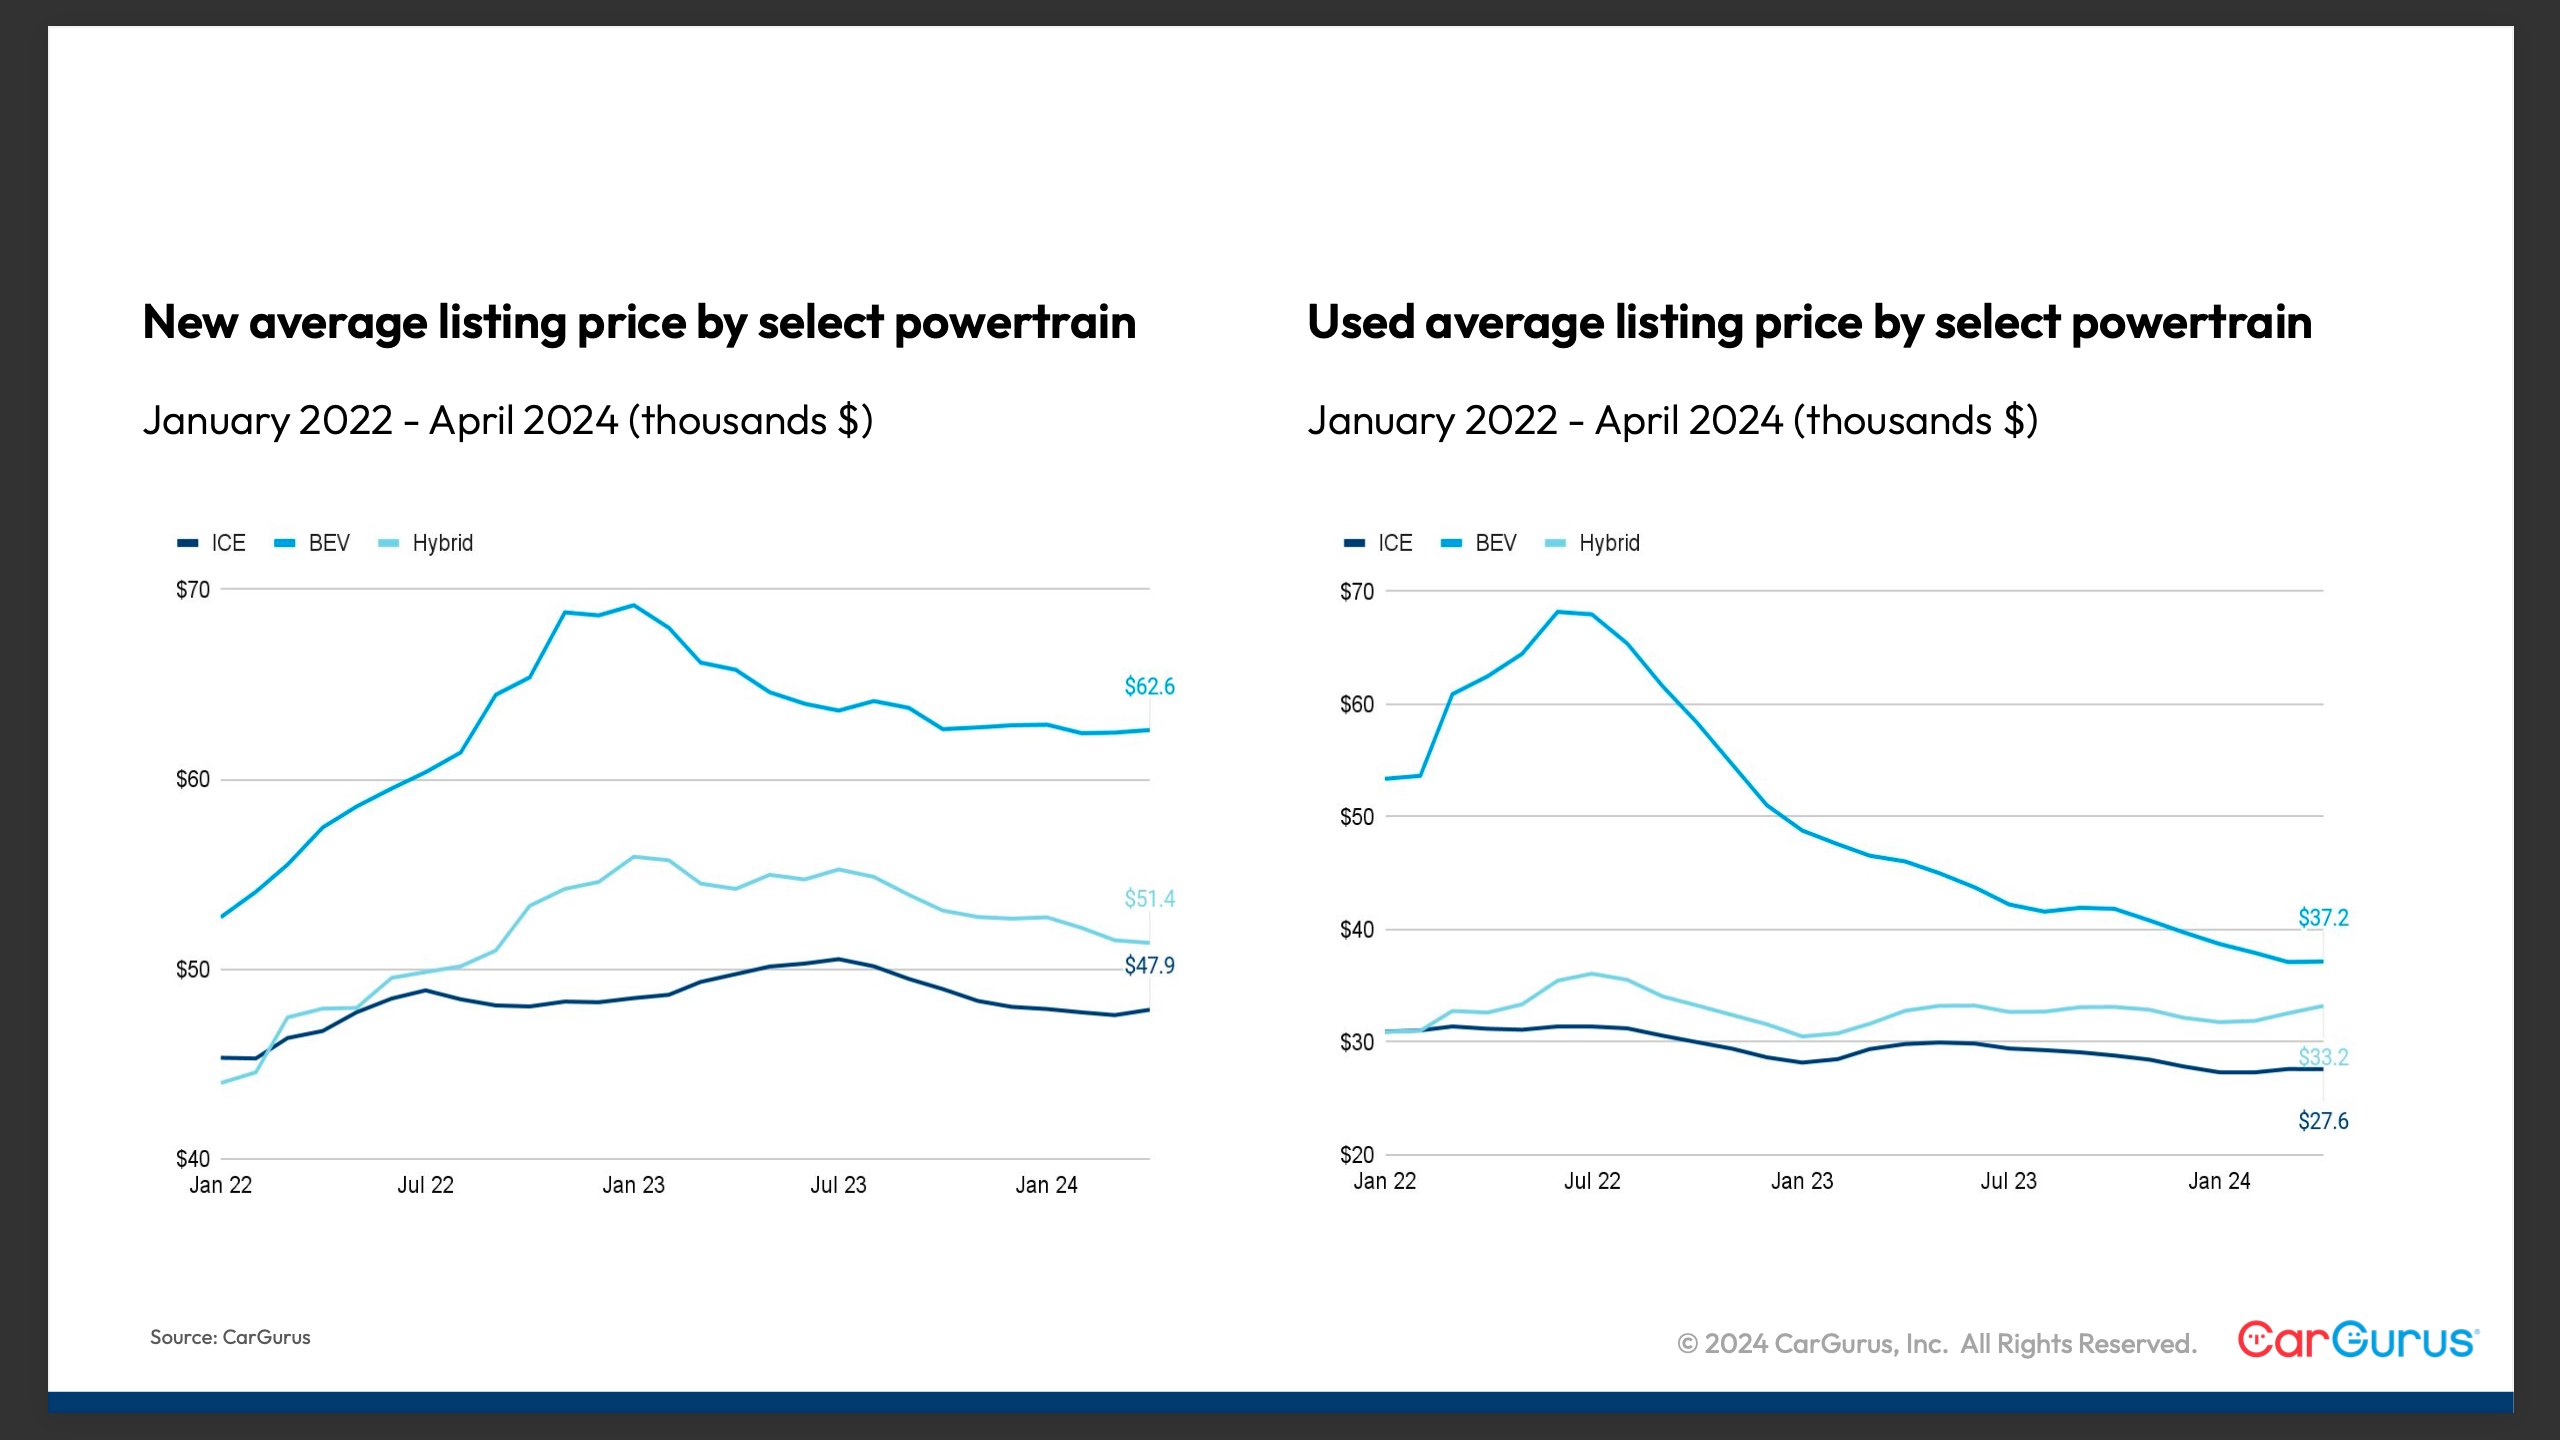 Image of graph results showing “New average listing price by select powertrain” and “Used average listing price by select powertrain”.